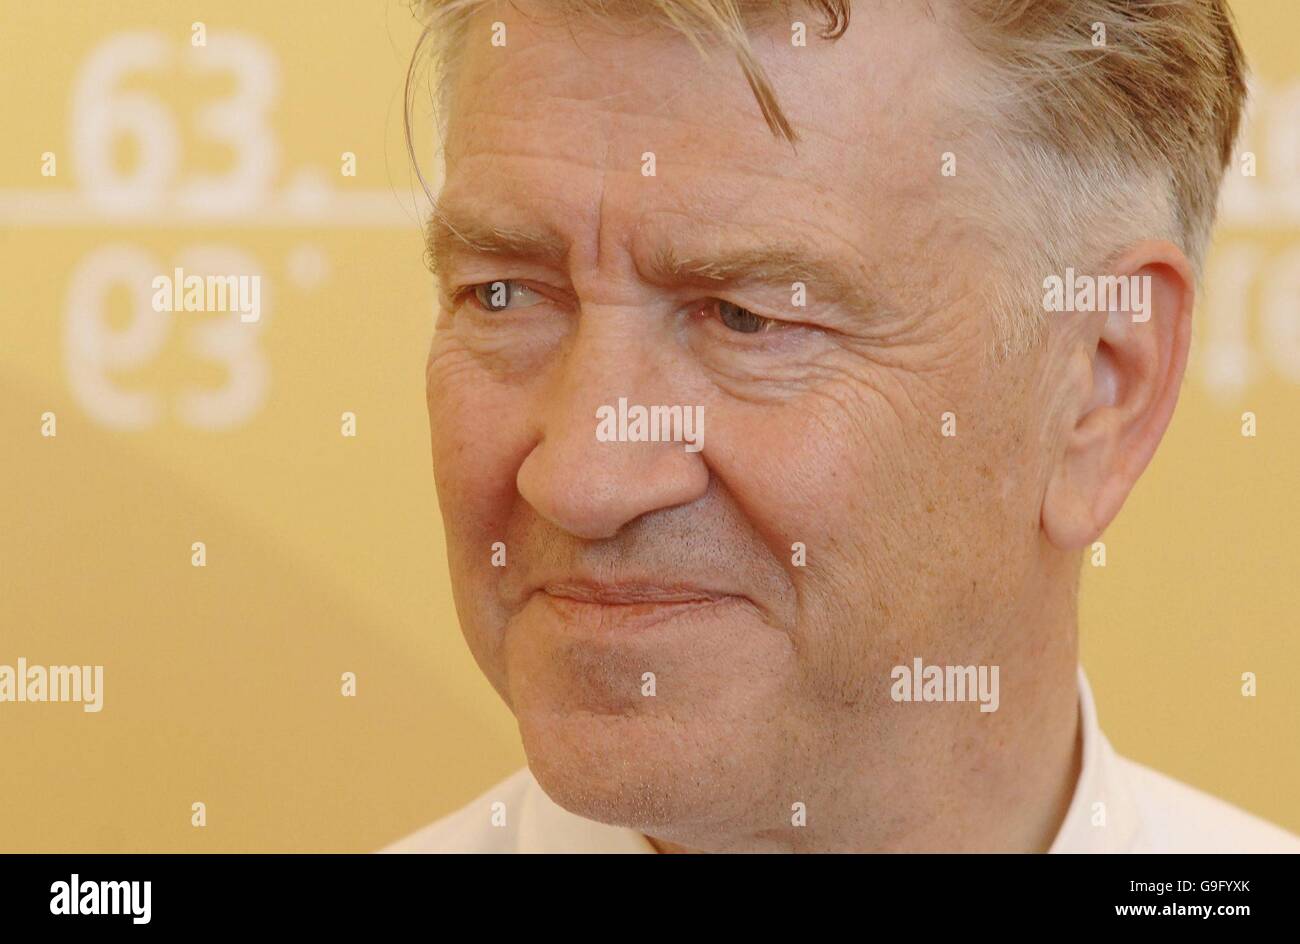 AP OUT David Lynch attends a photocall for his new film Inland Empire at the Palazzo del Casino, Venice, Italy during the 63rd Venice Film Festival. Stock Photo